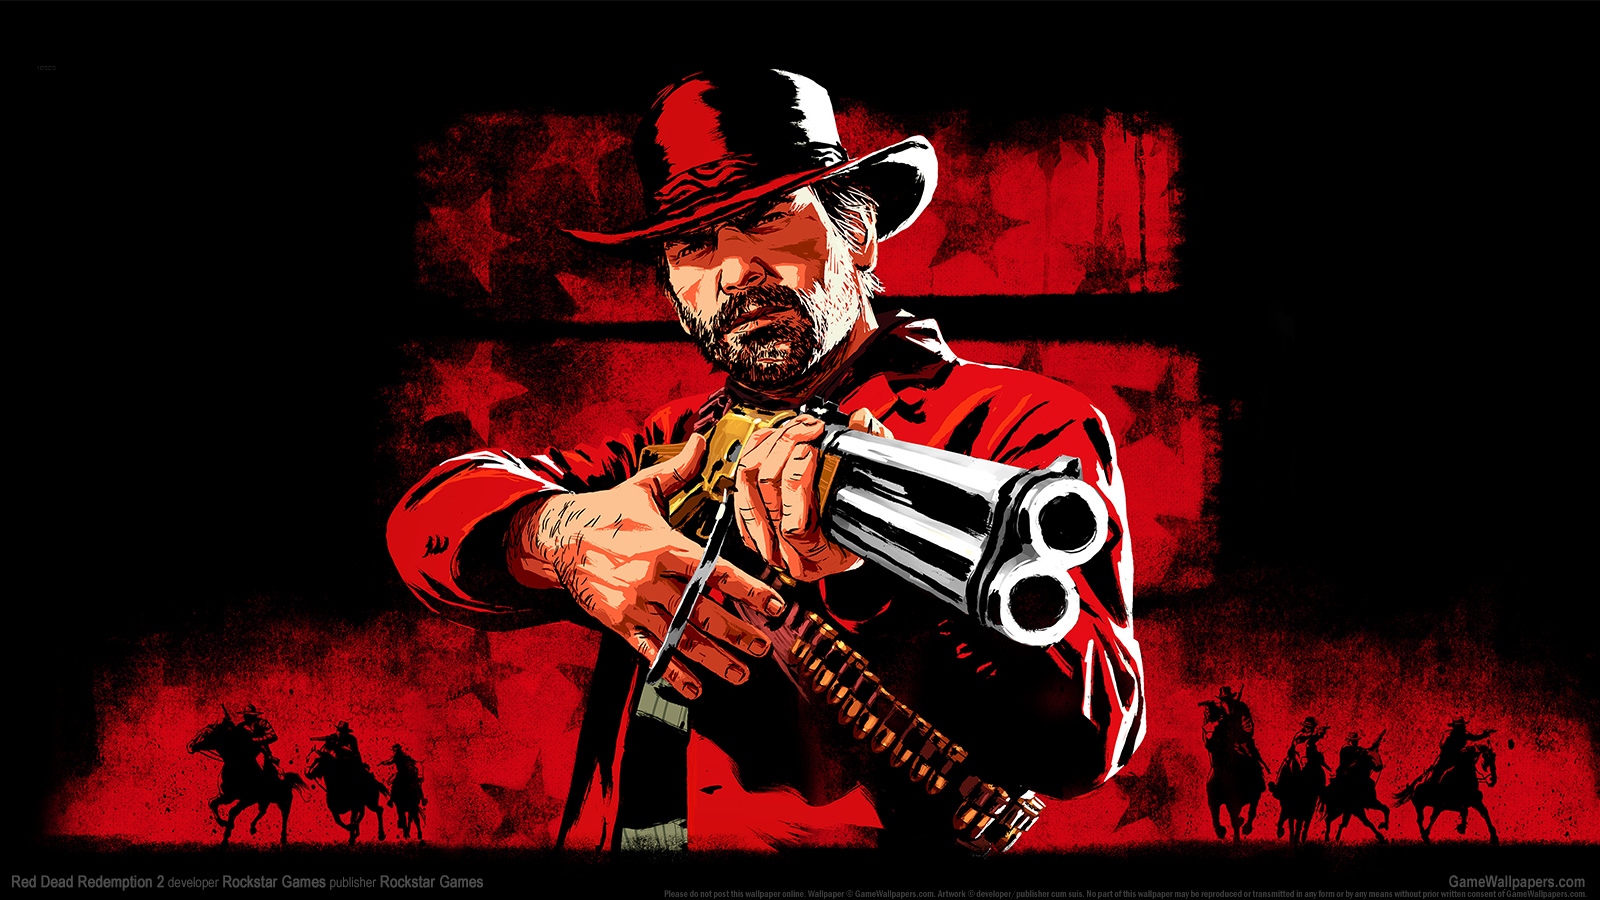 Red Dead Redemption 2 1600x900 wallpaper or background 04